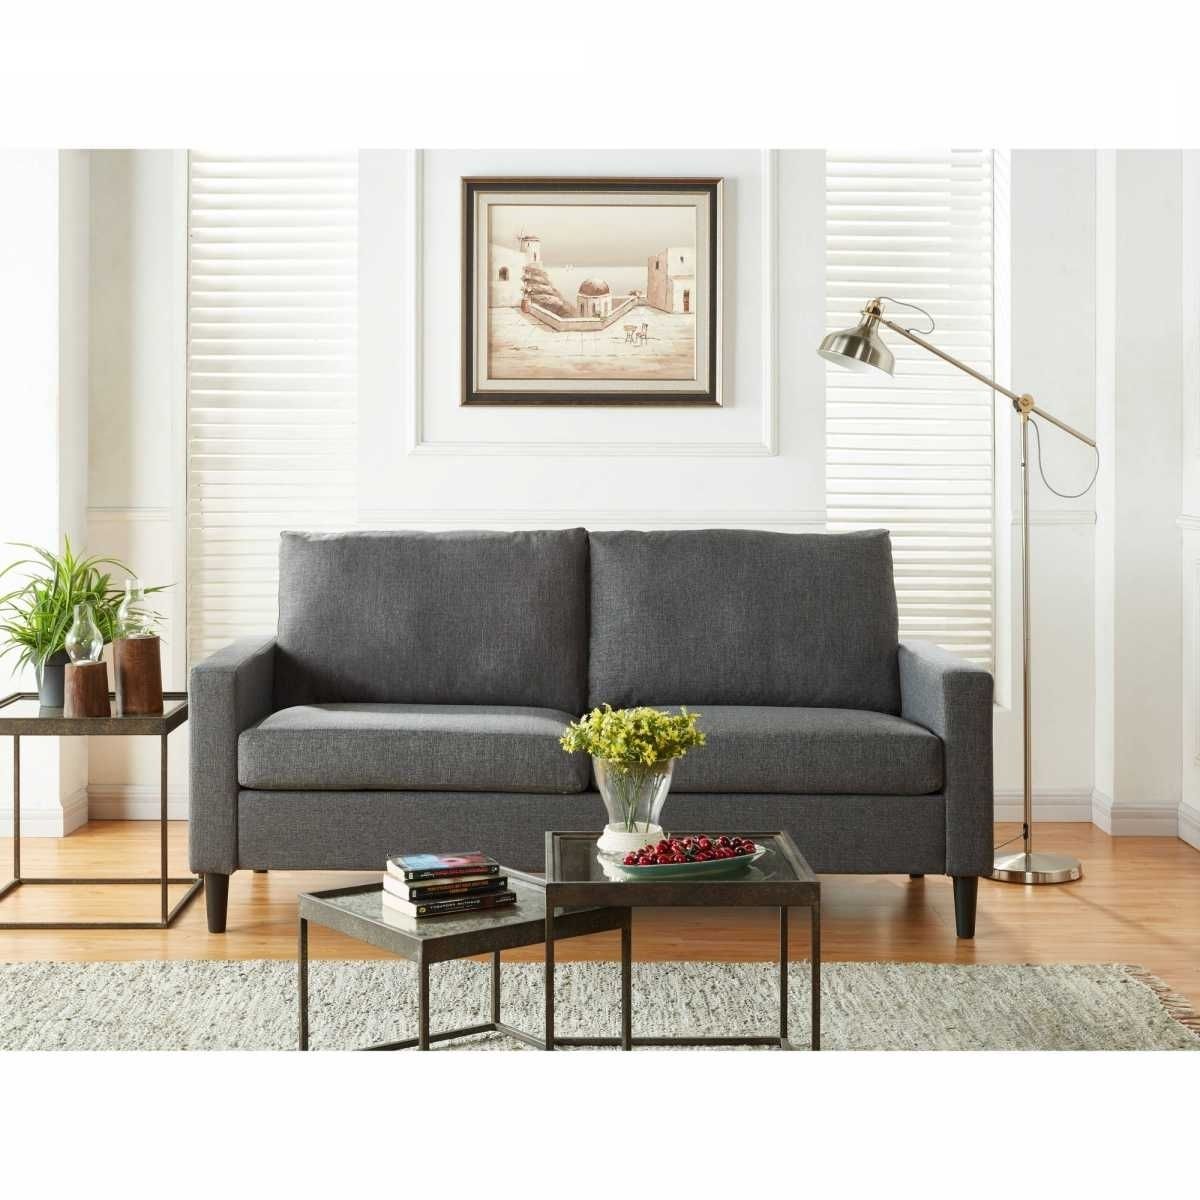 Loveseat : Furniture: Sectional Couch For Sale | Big Lots Roanoke Va Within Roanoke Va Sectional Sofas (View 8 of 10)